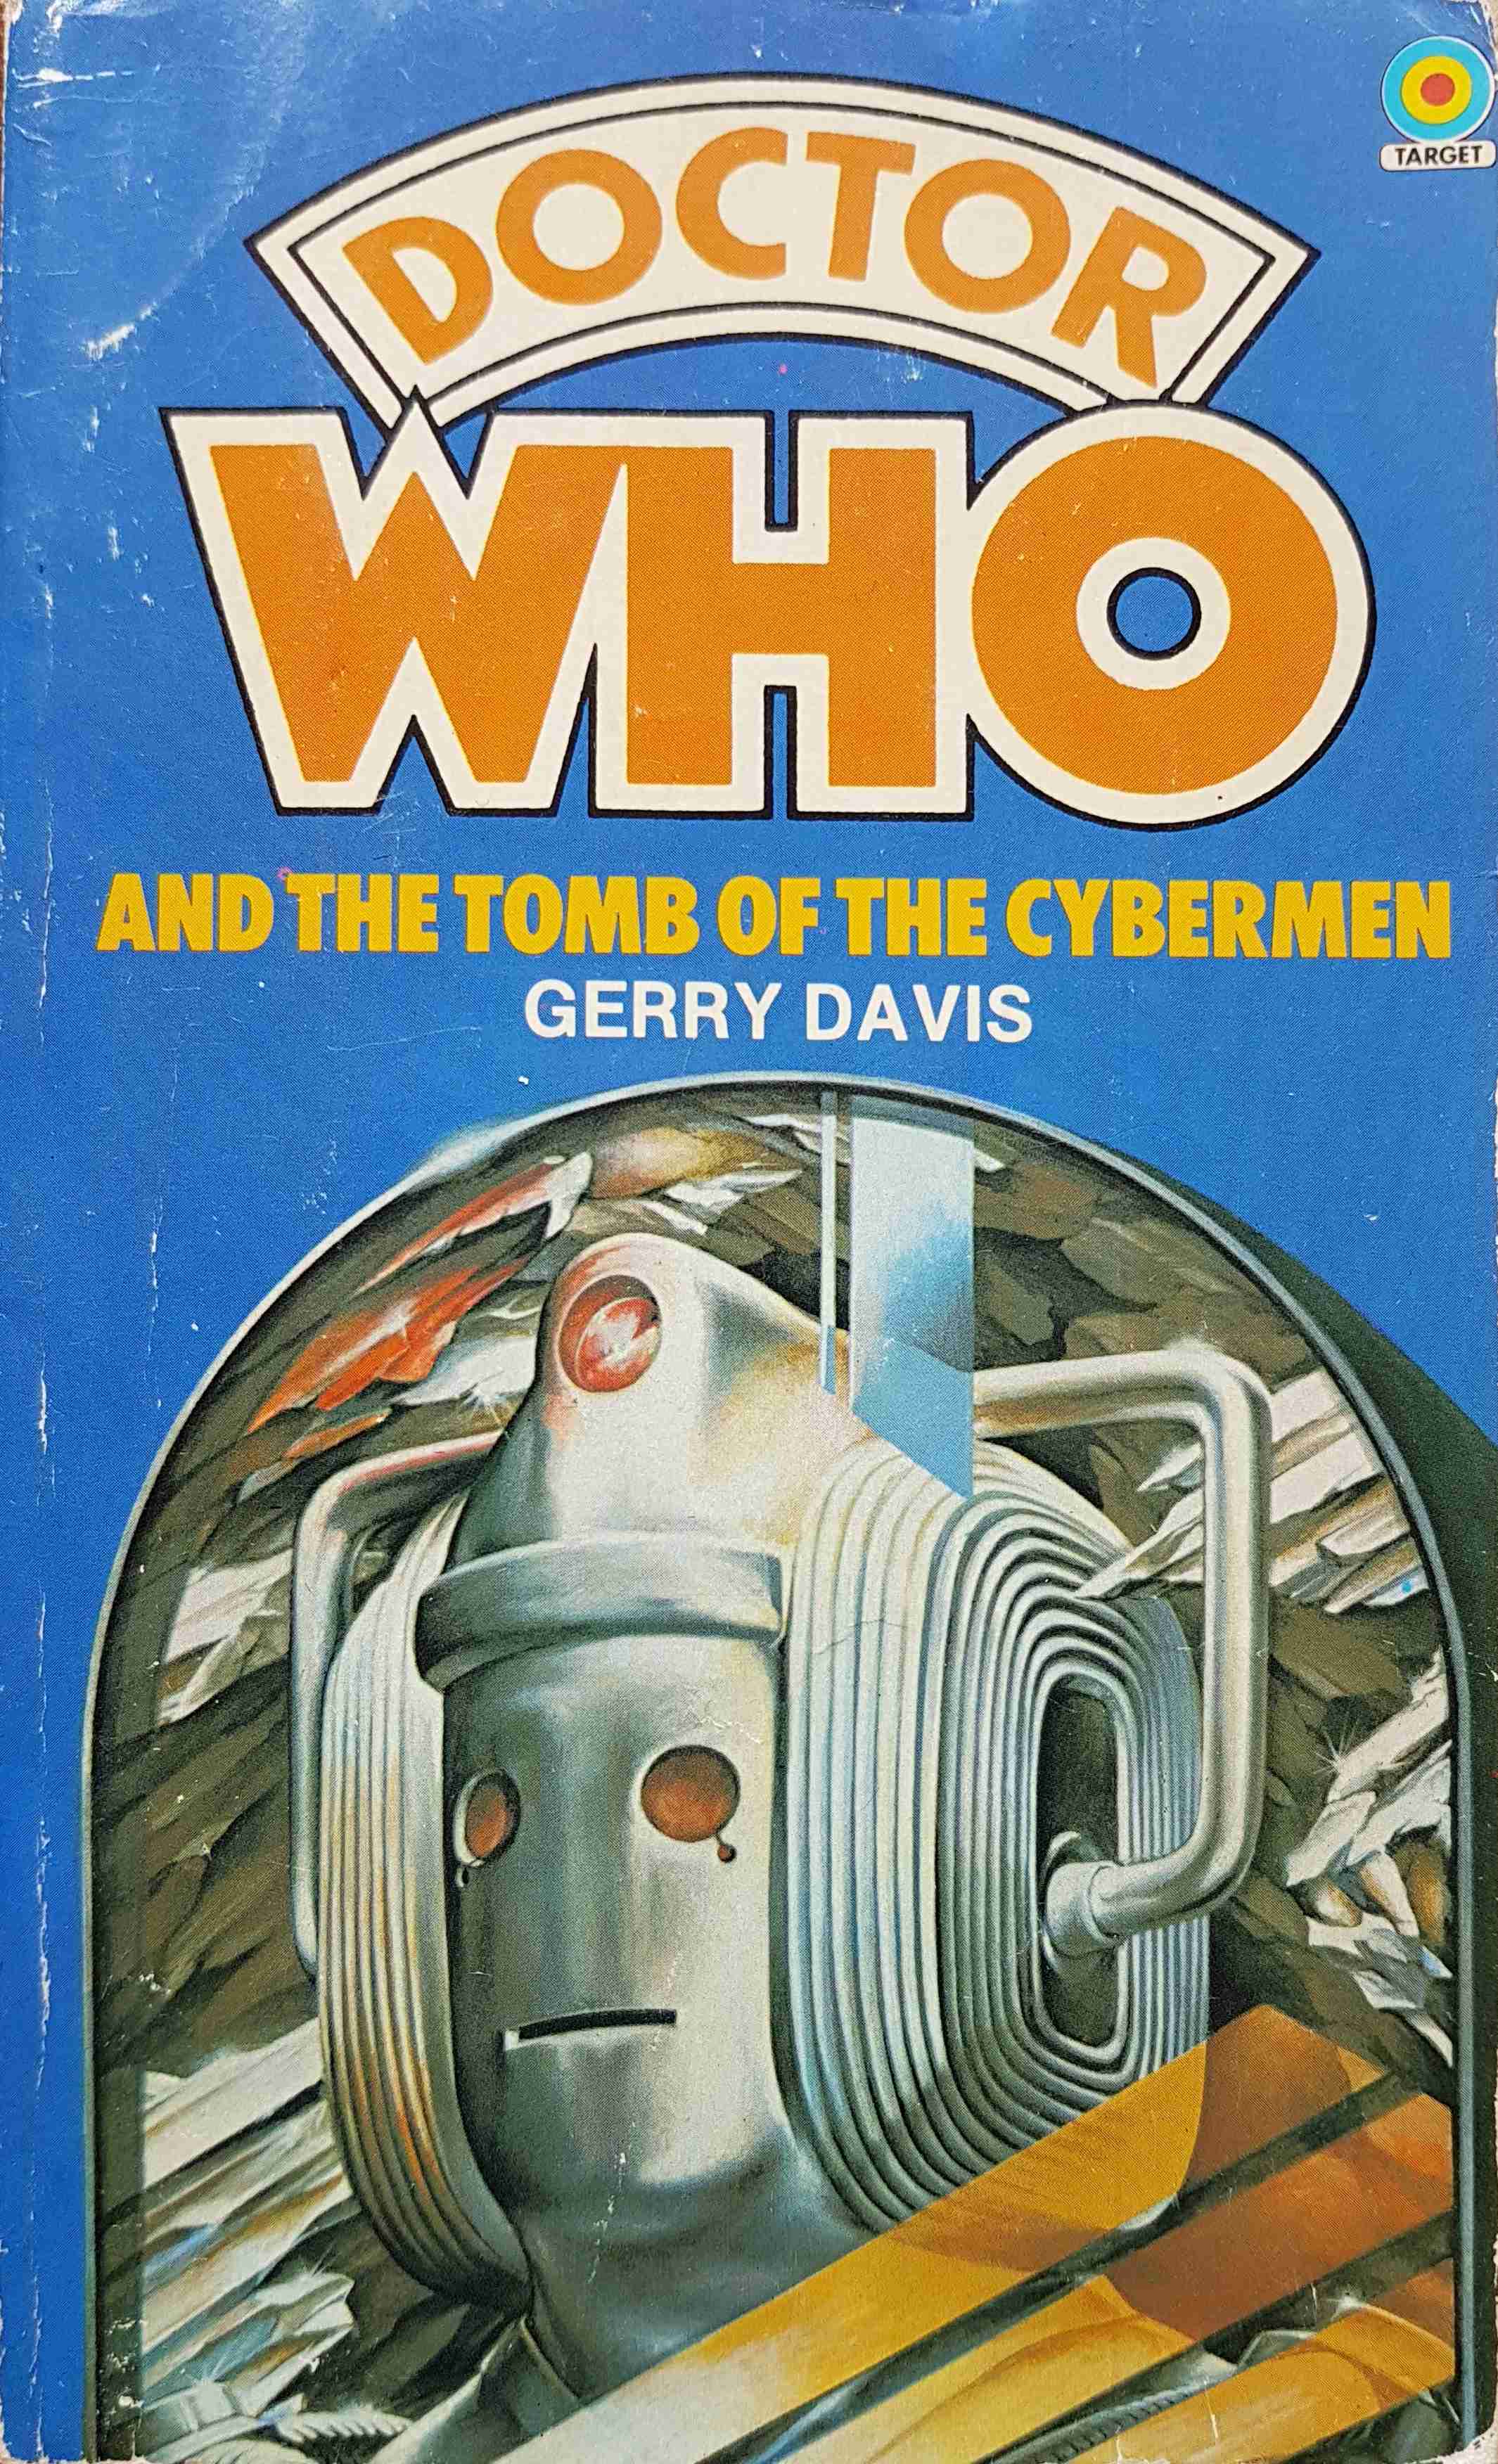 Picture of Doctor Who - Tomb of the Cybermen by artist Gerry Davis from the BBC books - Records and Tapes library